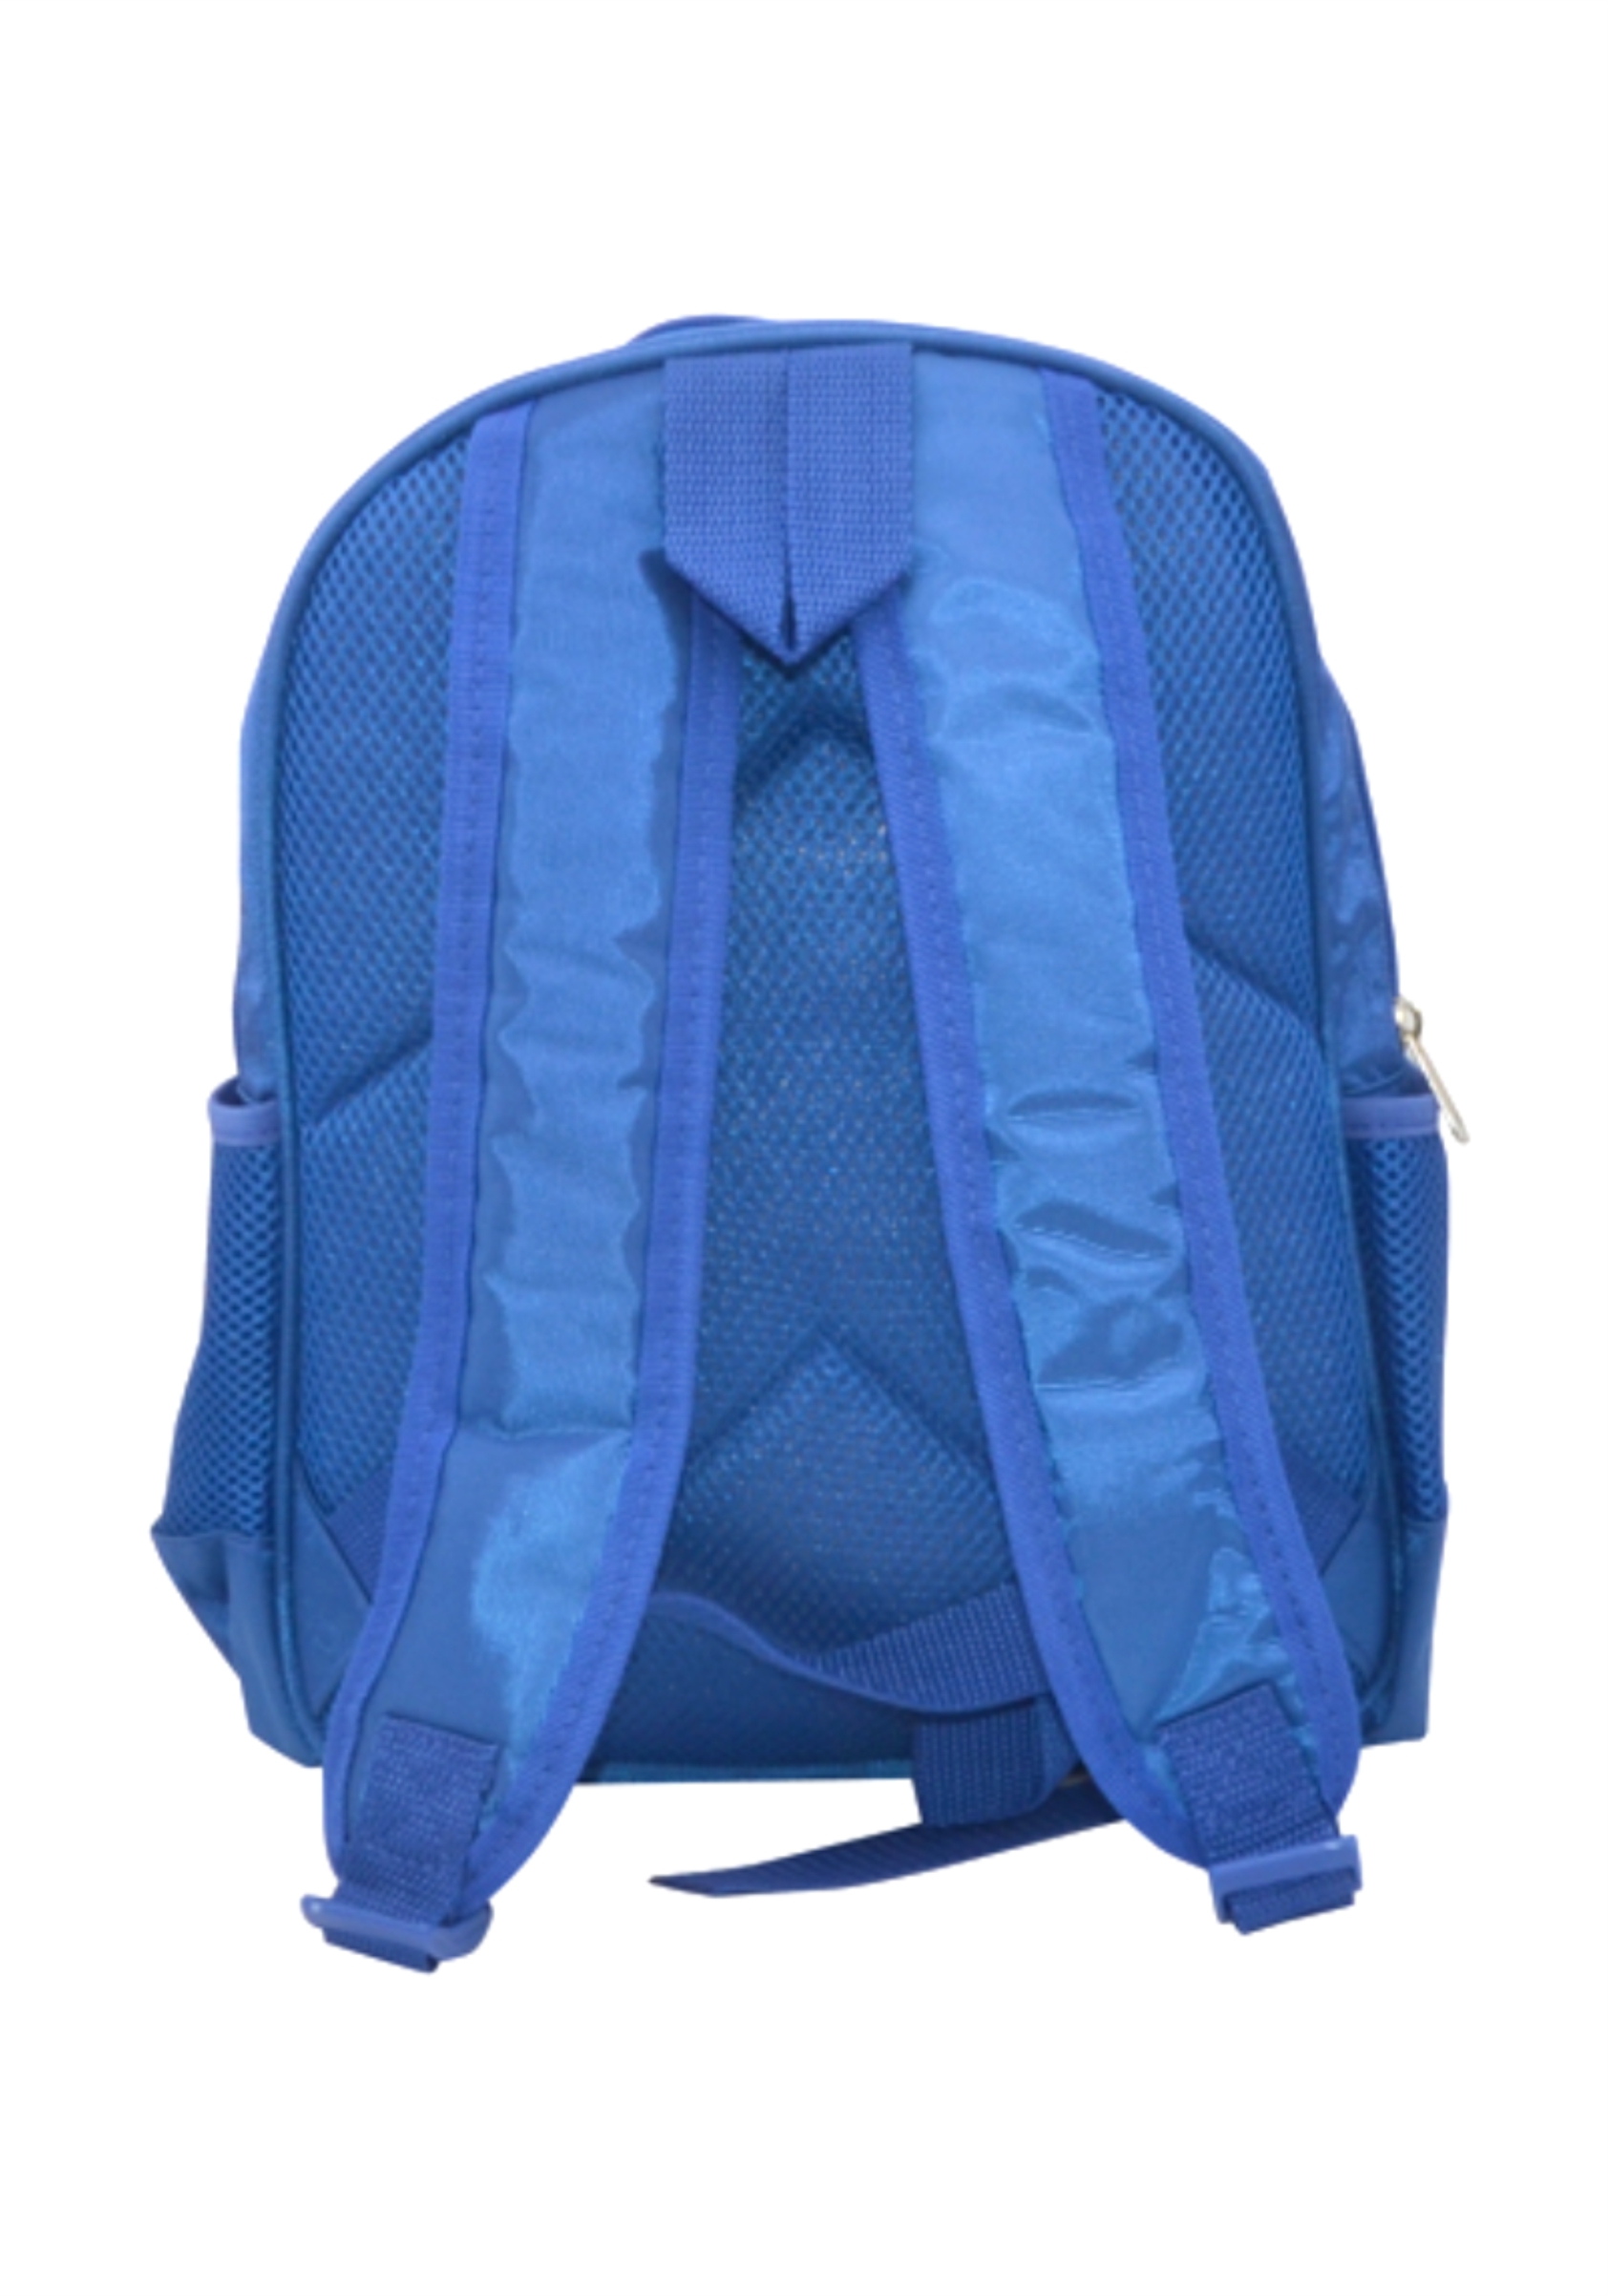 Candy Shoppe Girls Blue Preschool Toddler Childrens Backpack & Lunchbox - image 3 of 4